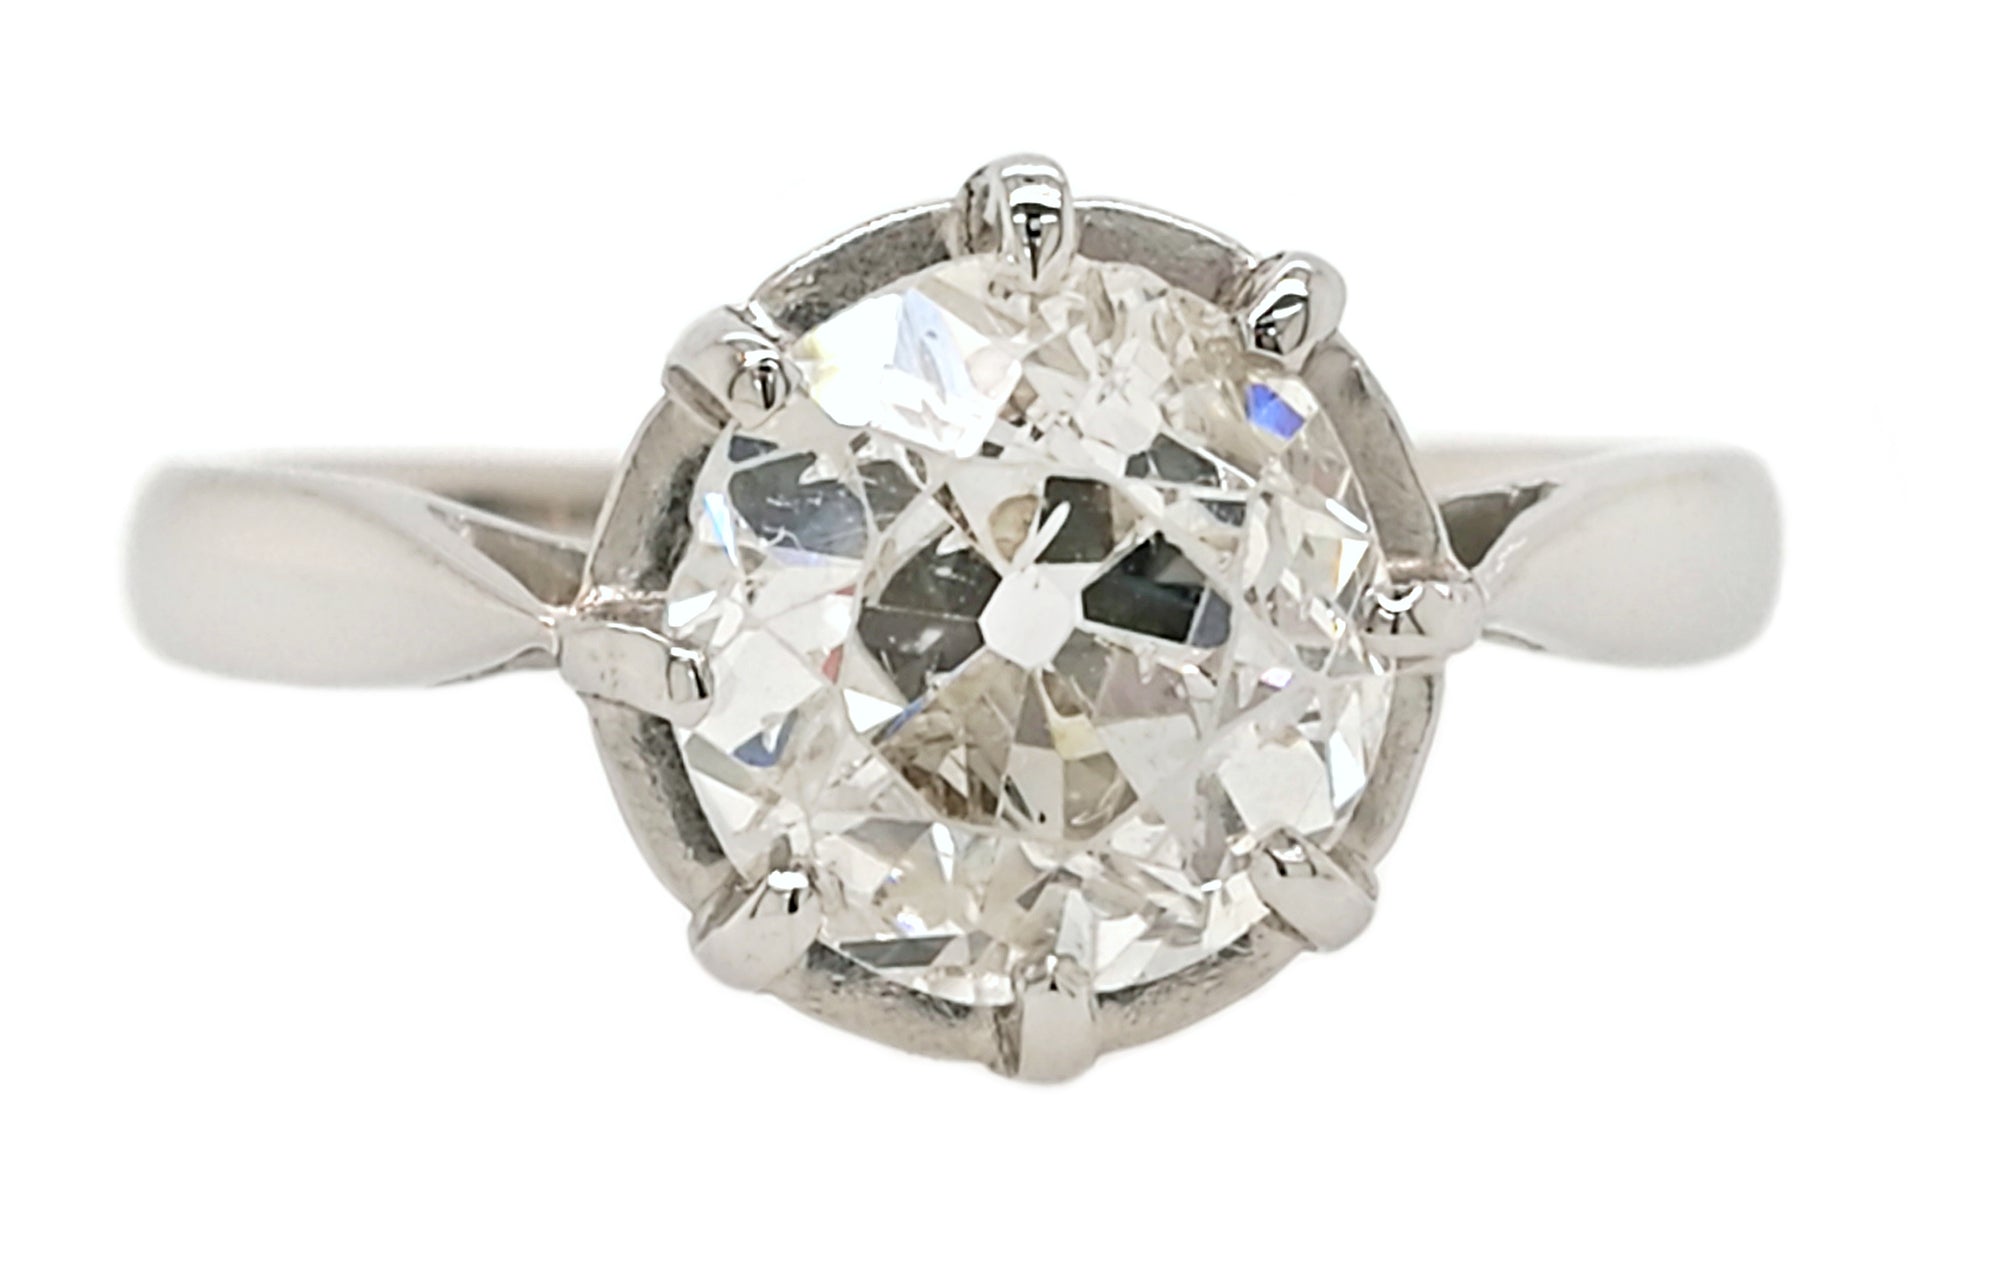 1920s Antique French 1.51ct Old Cut Diamond Engagement Ring in Platinum